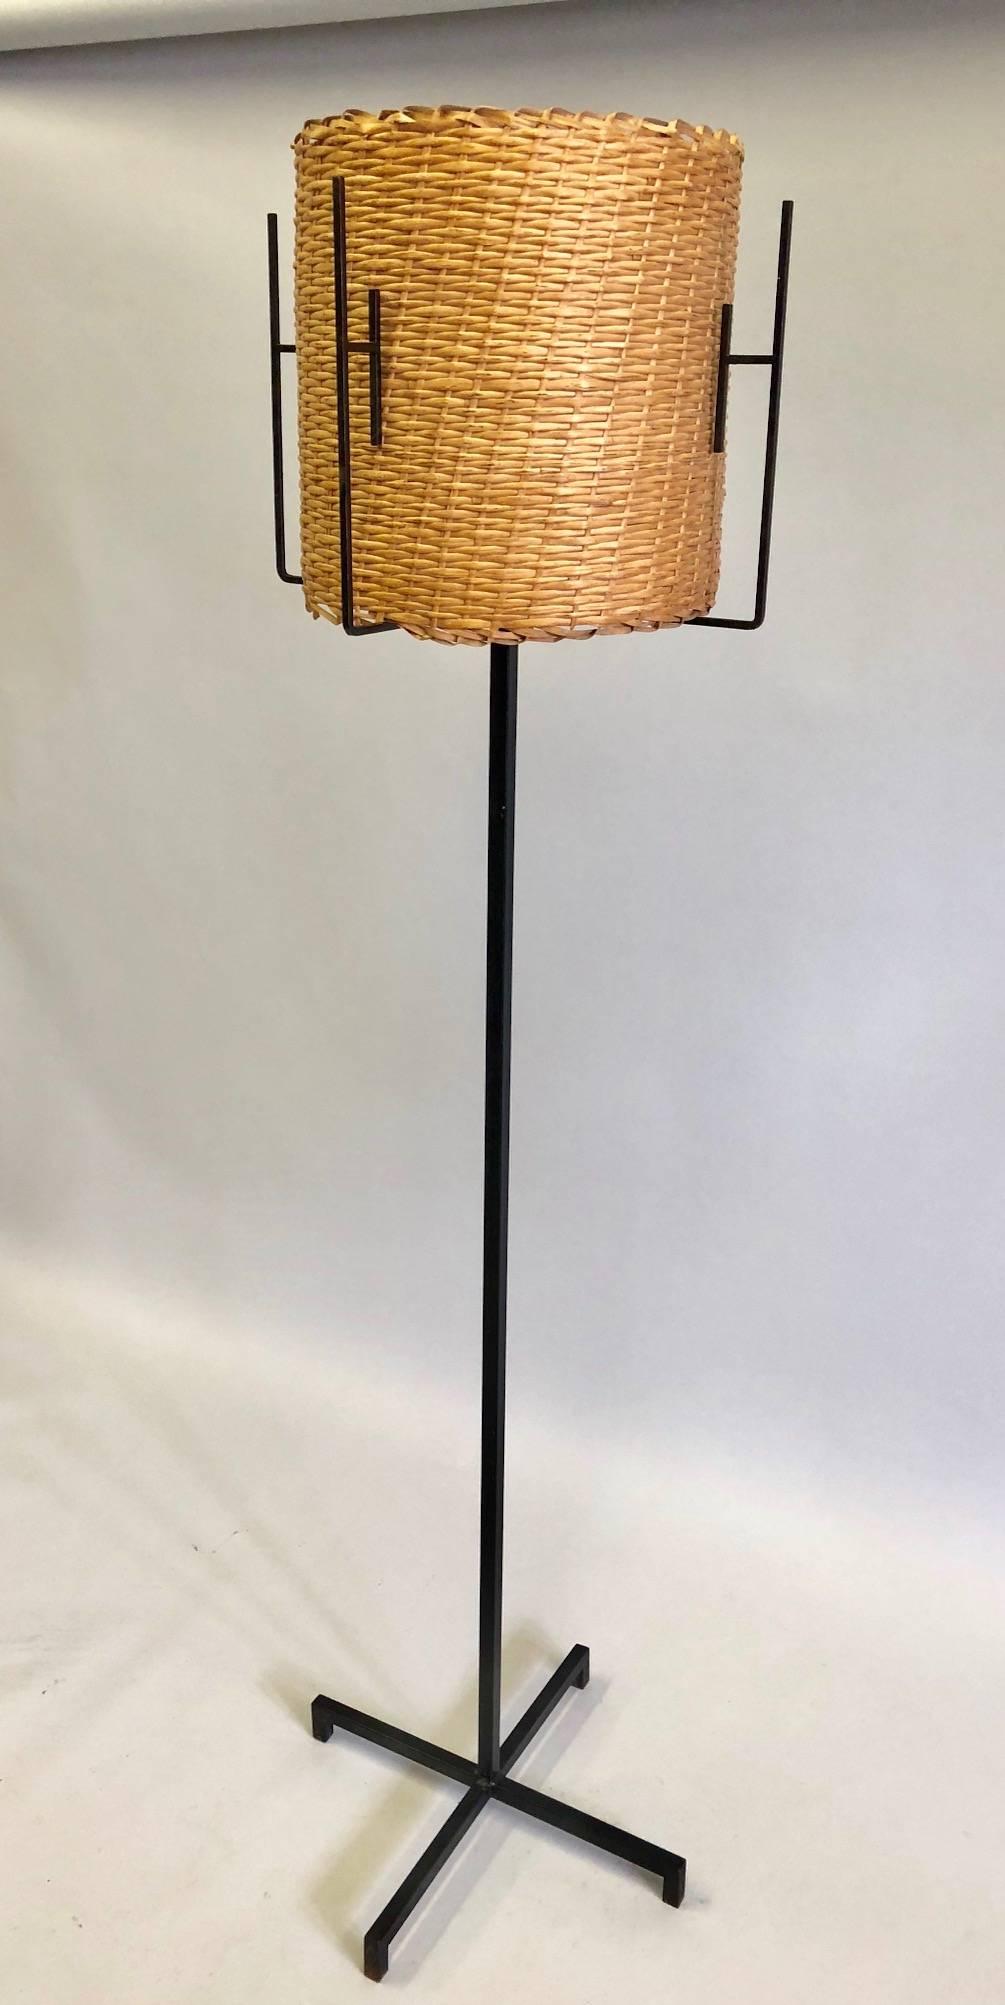 Rare pair of French Mid-Century Modern enameled wrought iron standing lamps by Disderot. 

The floor lamps feature a modern neoclassical X-form base supporting a sleek stem from which emanates minimalist architectural brackets that elegantly encase